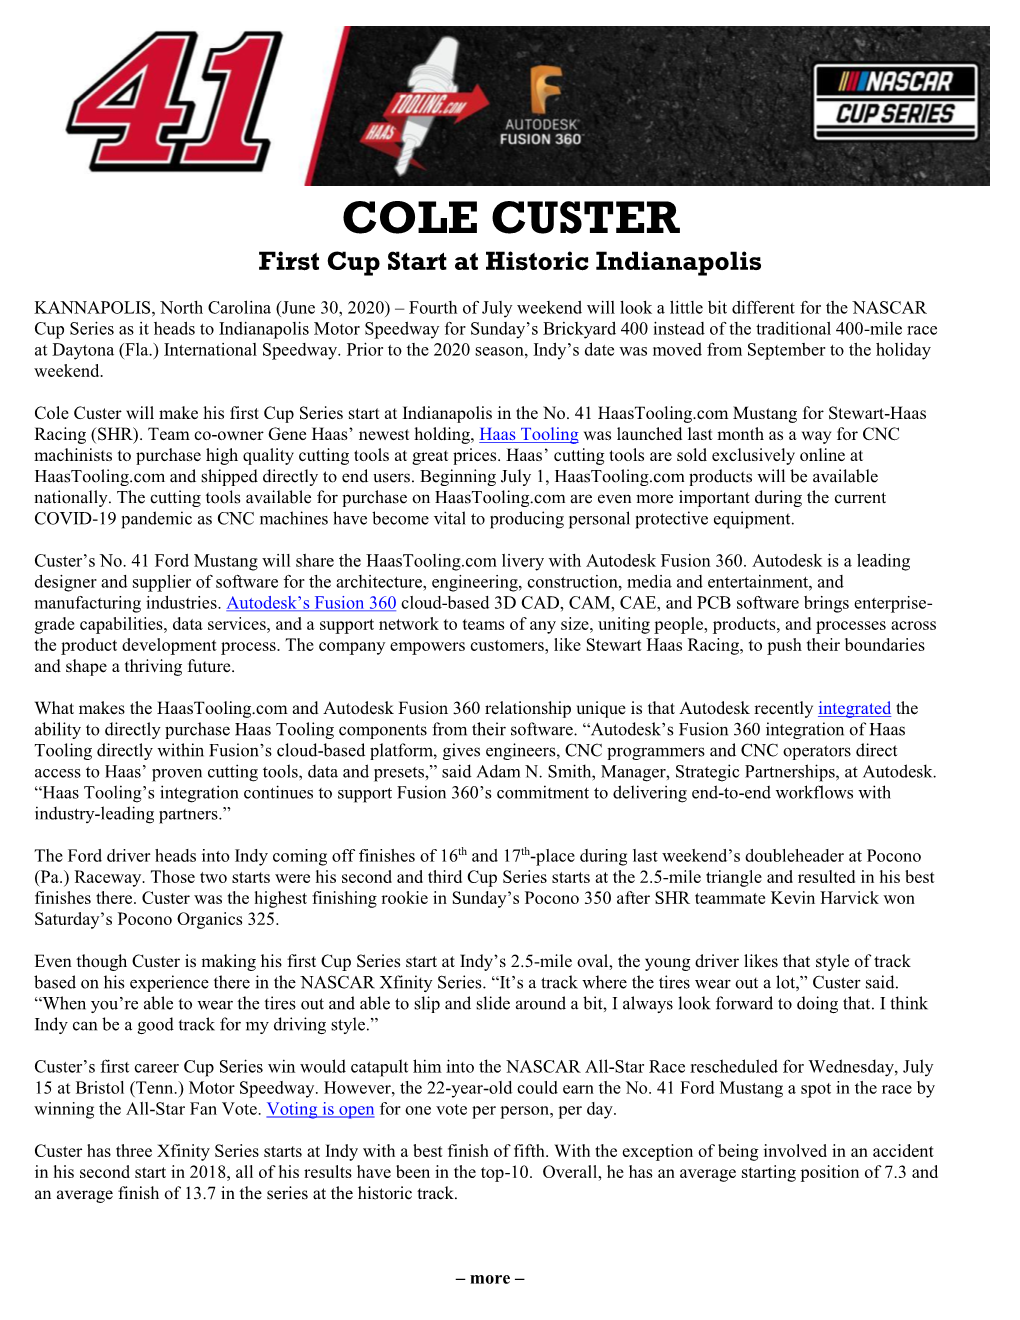 COLE CUSTER First Cup Start at Historic Indianapolis